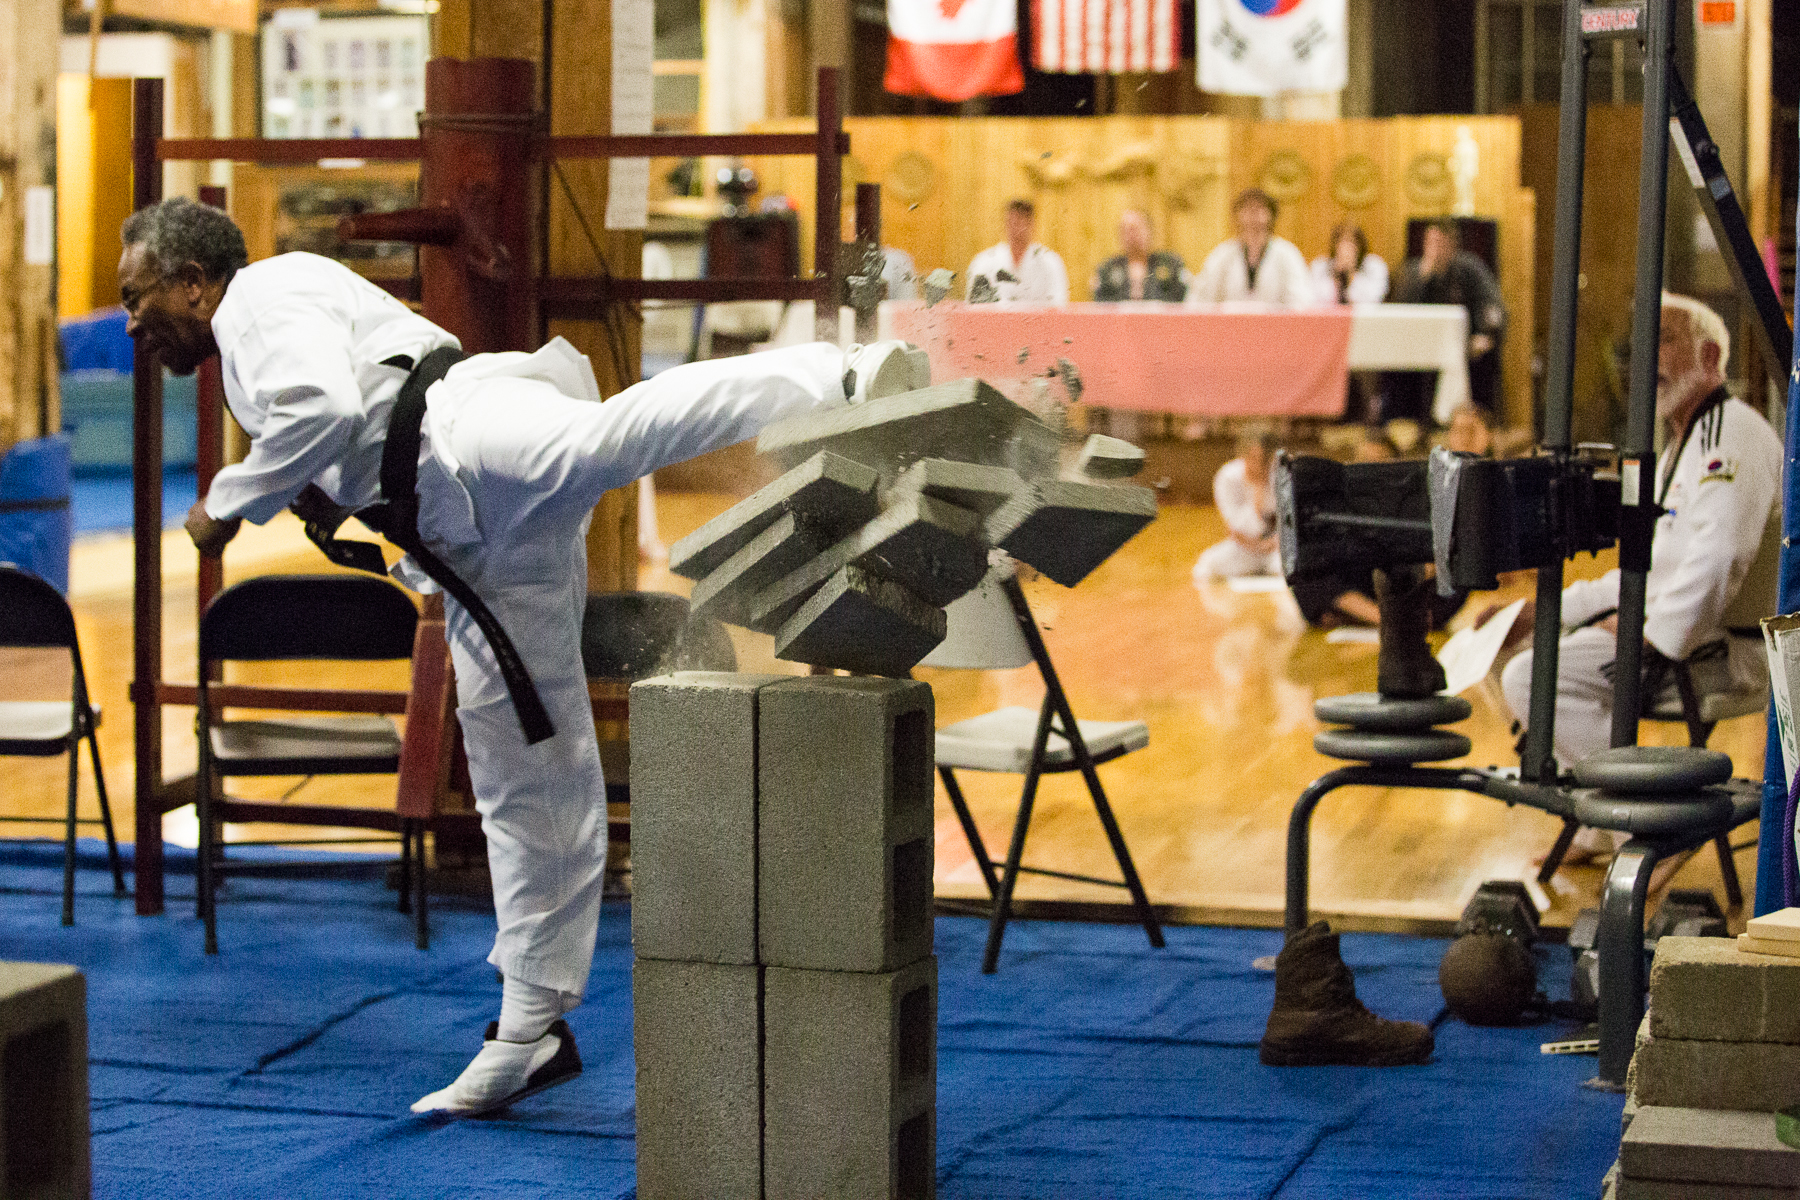 Taekwondo instructor Sterling Chase breaks five bricks with a speed kick during martial arts testing at White Crane Martial Arts in Port Angeles. Chase tested for the high rank of seventh dan